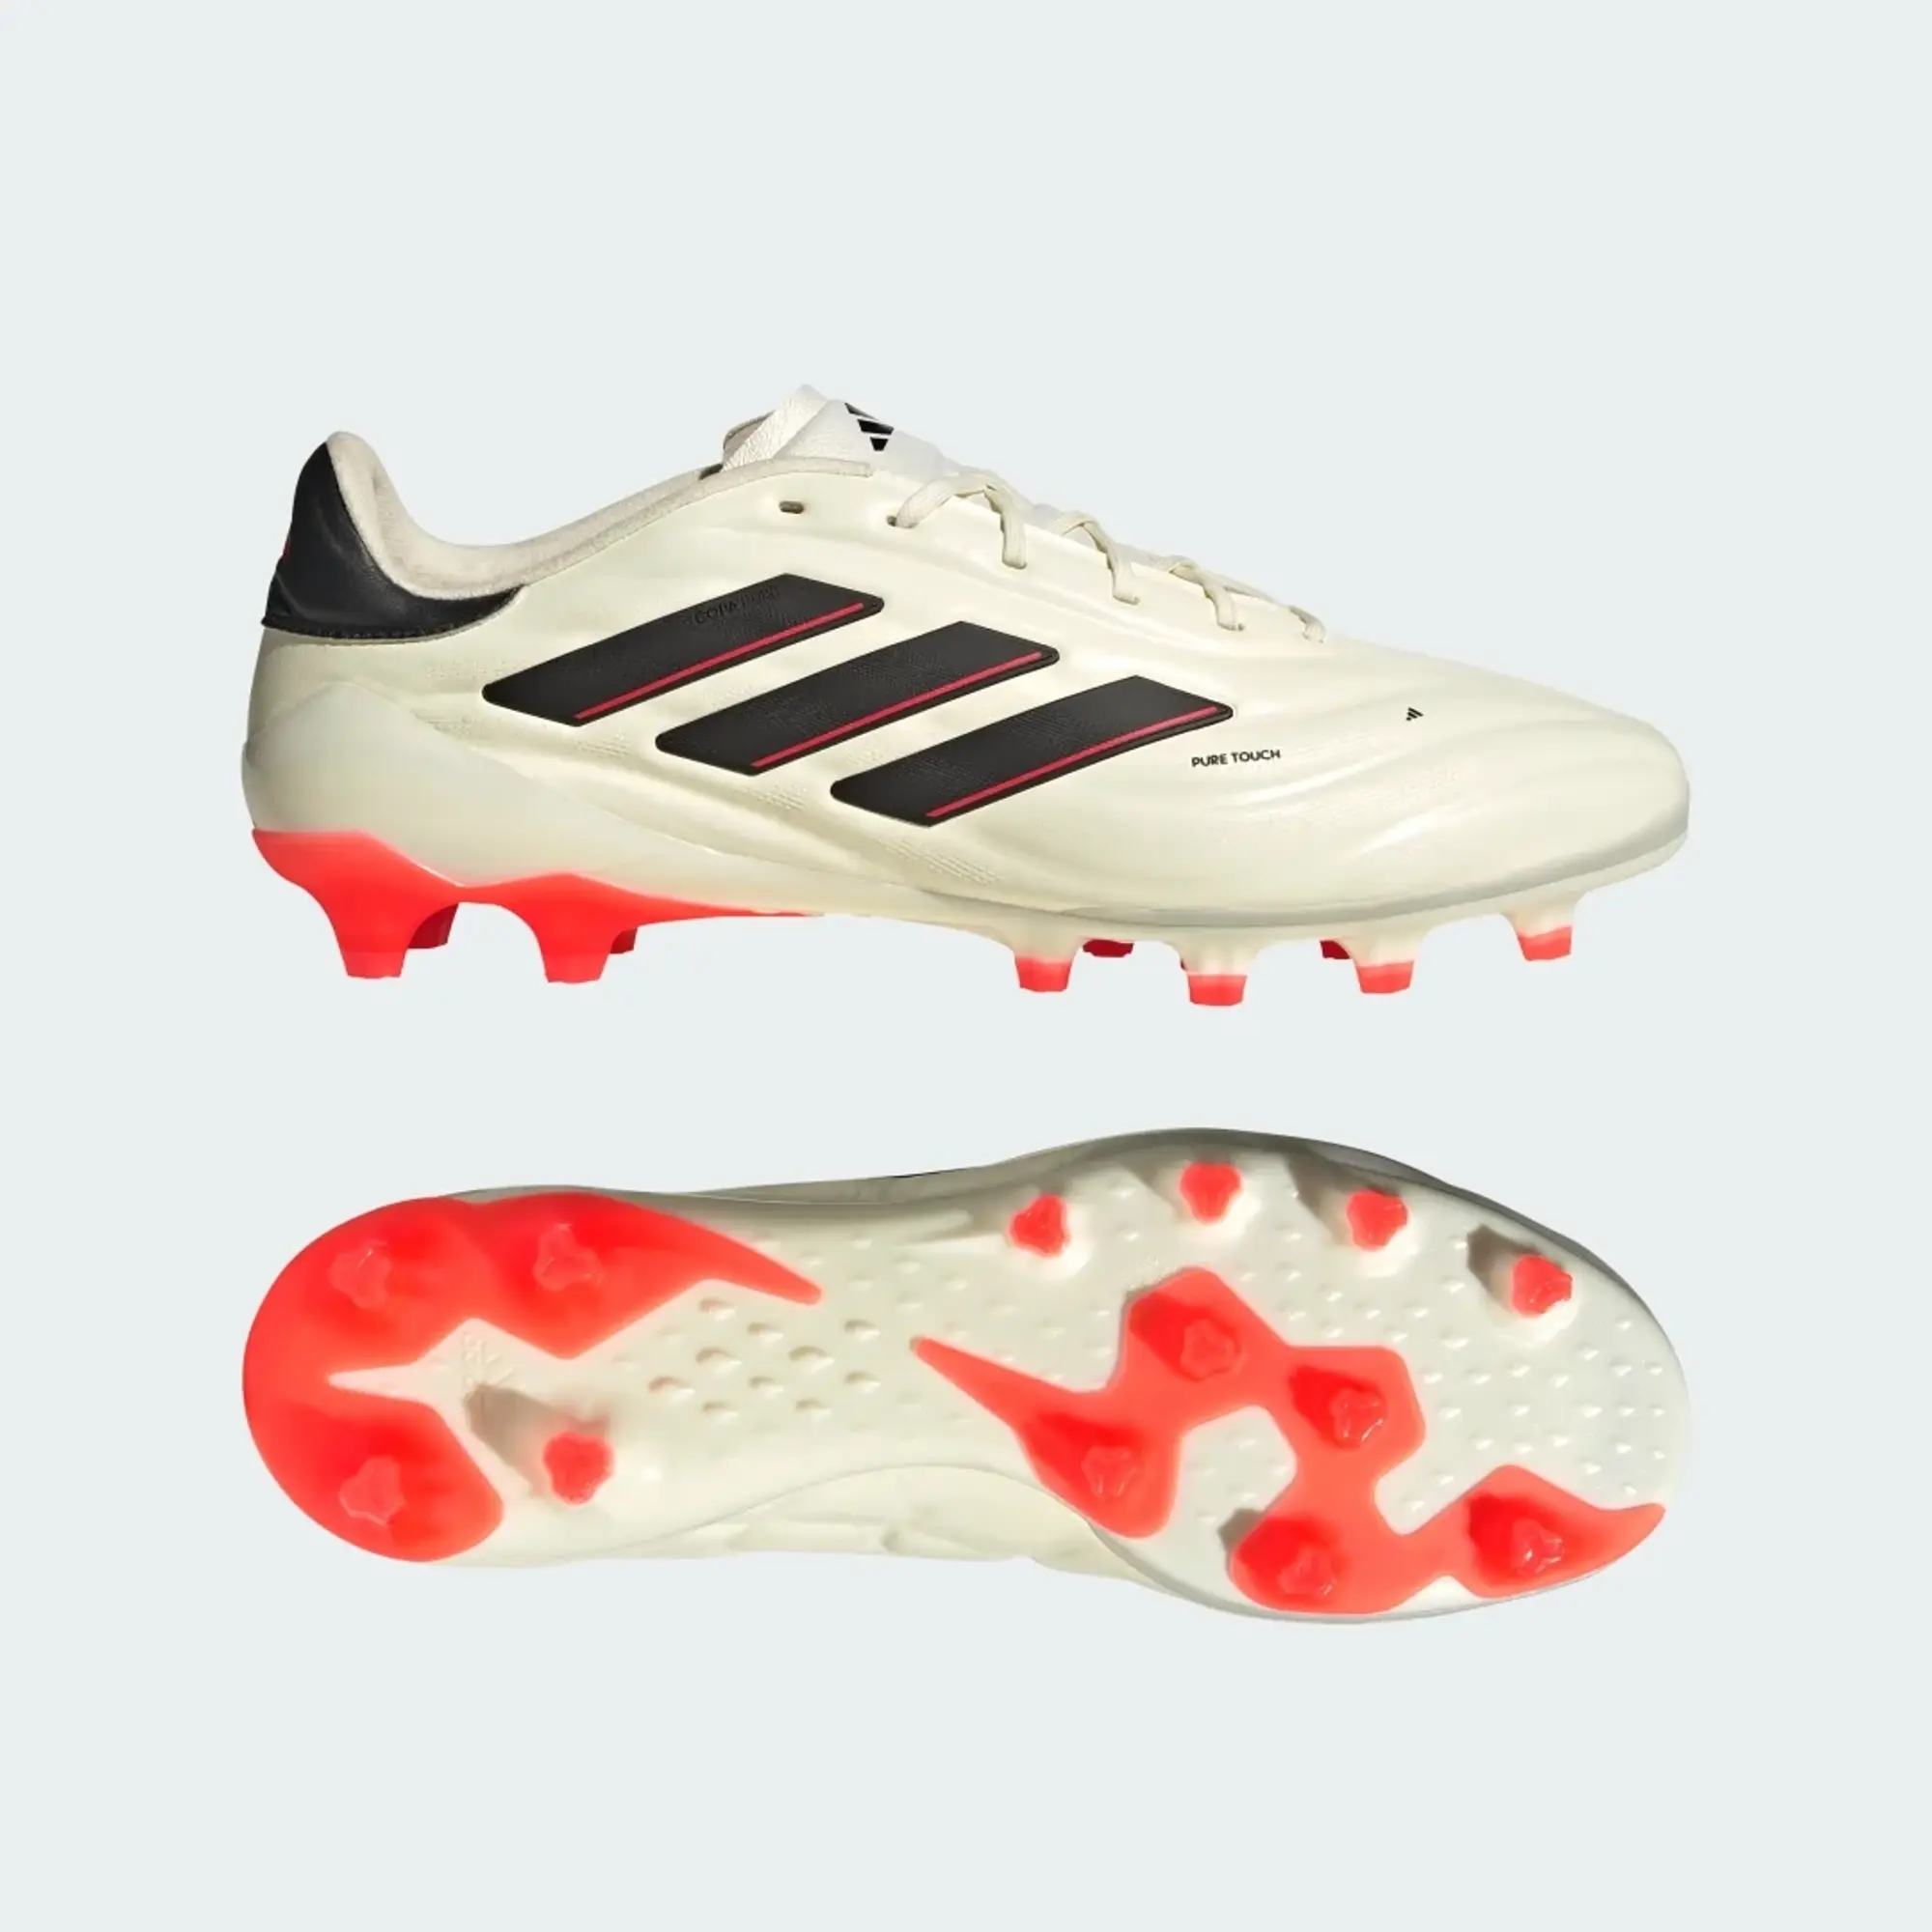 adidas Copa Pure II Elite Artificial Grass Boots - Ivory / Core Black / Solar Red